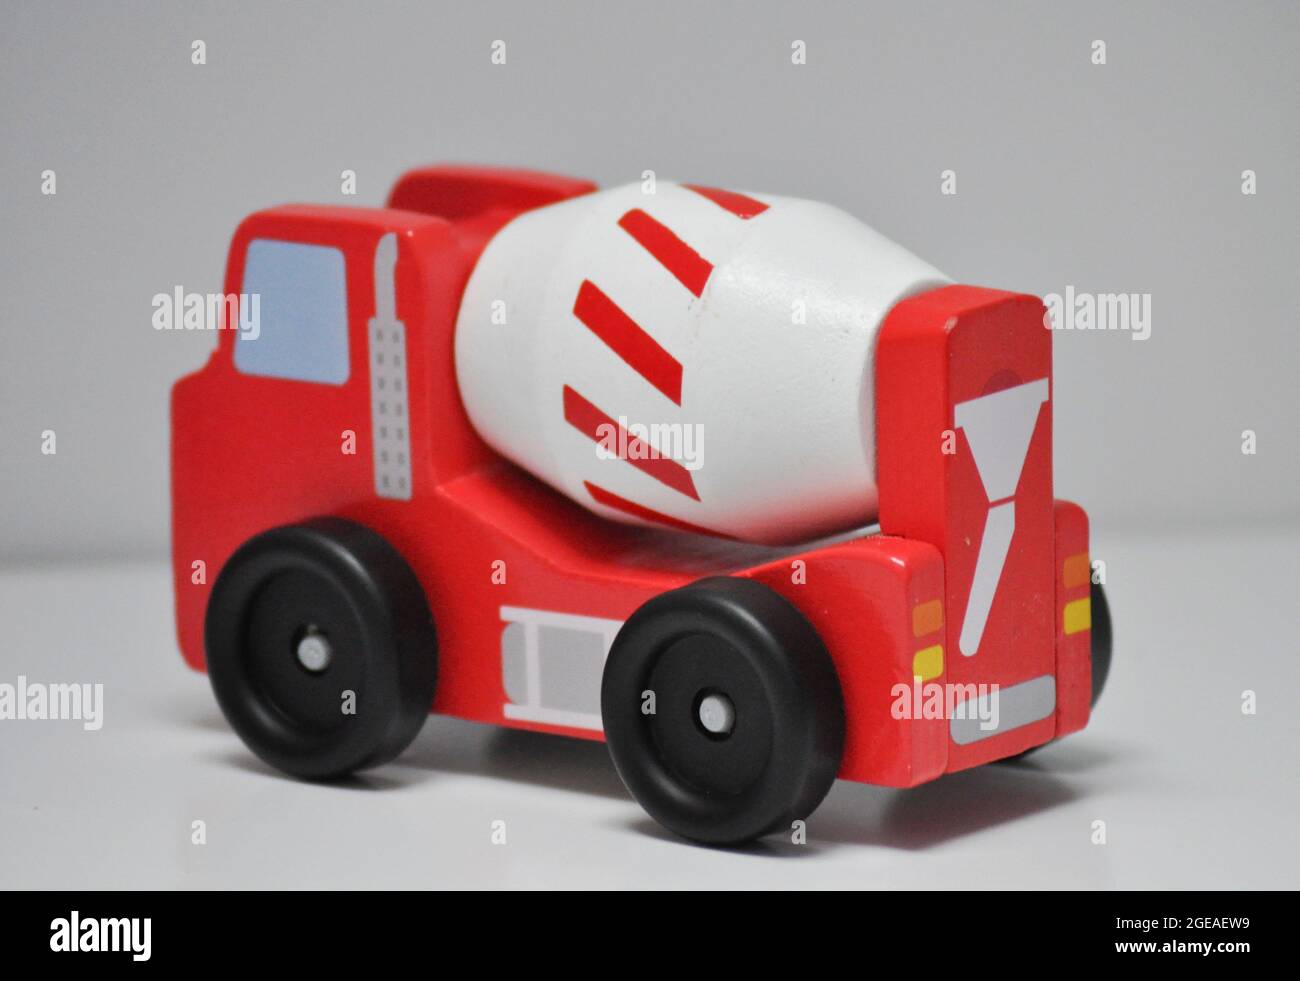 Red lorry with white cement mixer - wooden construction toy set against a white background Stock Photo